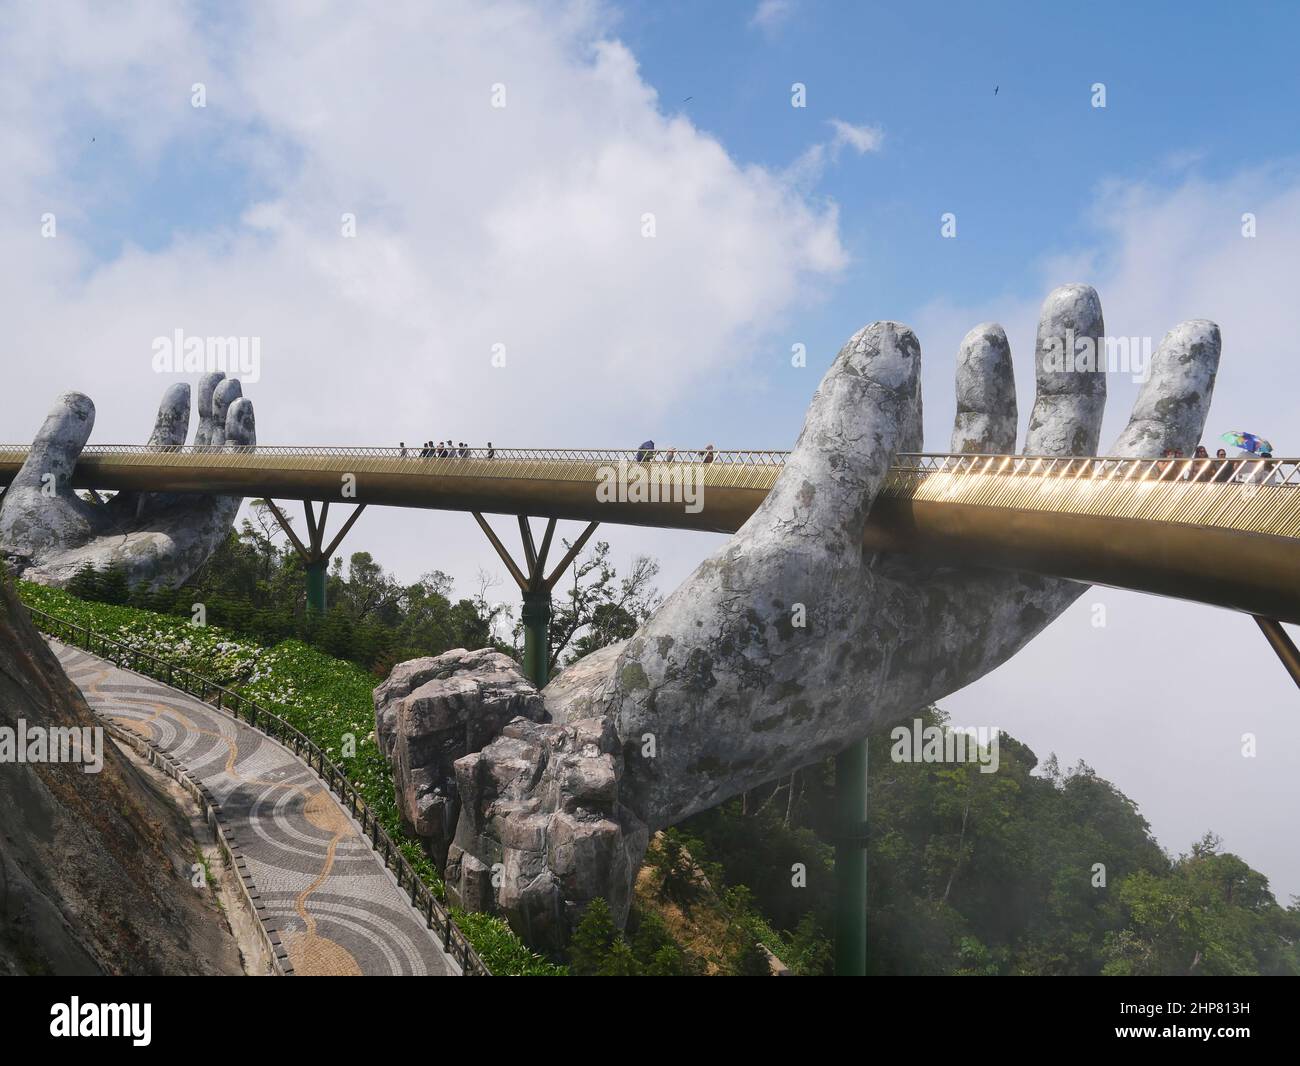 Da Nang, Vietnam - April 12, 2021: Golden Bridge lifted by giant hands in Ba Na Hills, a famous theme park and resort in Central Vietnam Stock Photo